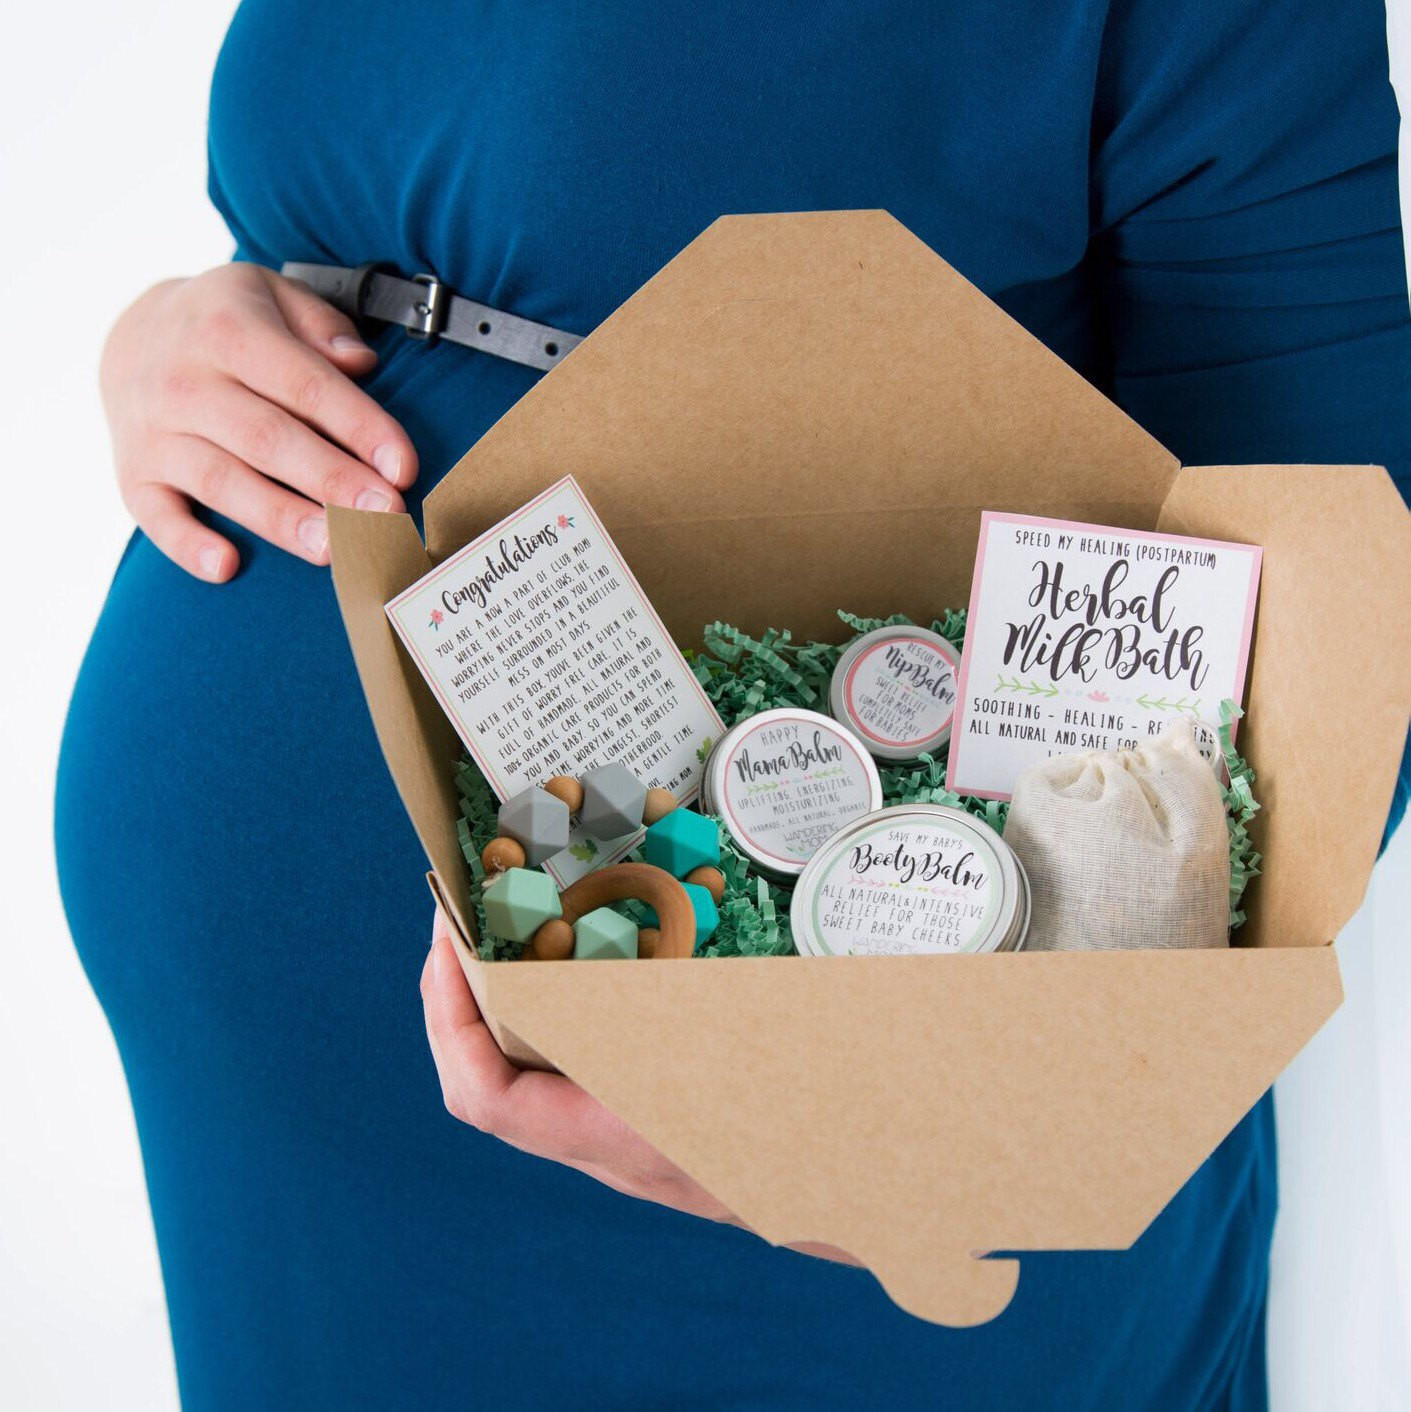 Post Baby Gifts For Mum
 New Mom Gift Basket Organic Baby and postpartum Essentials